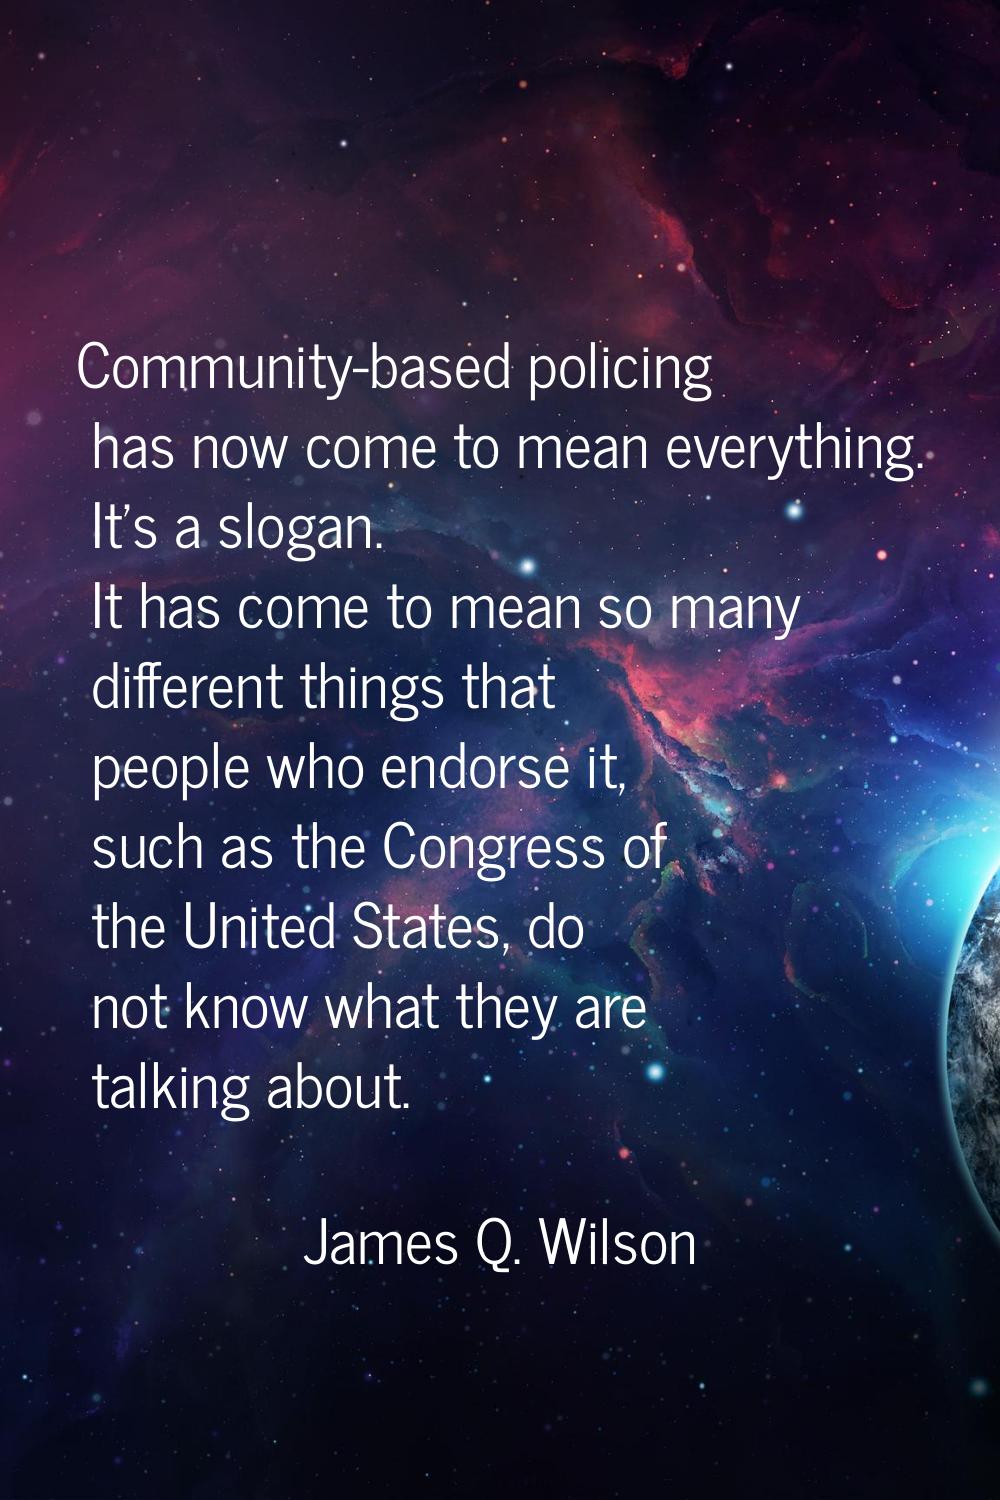 Community-based policing has now come to mean everything. It's a slogan. It has come to mean so man